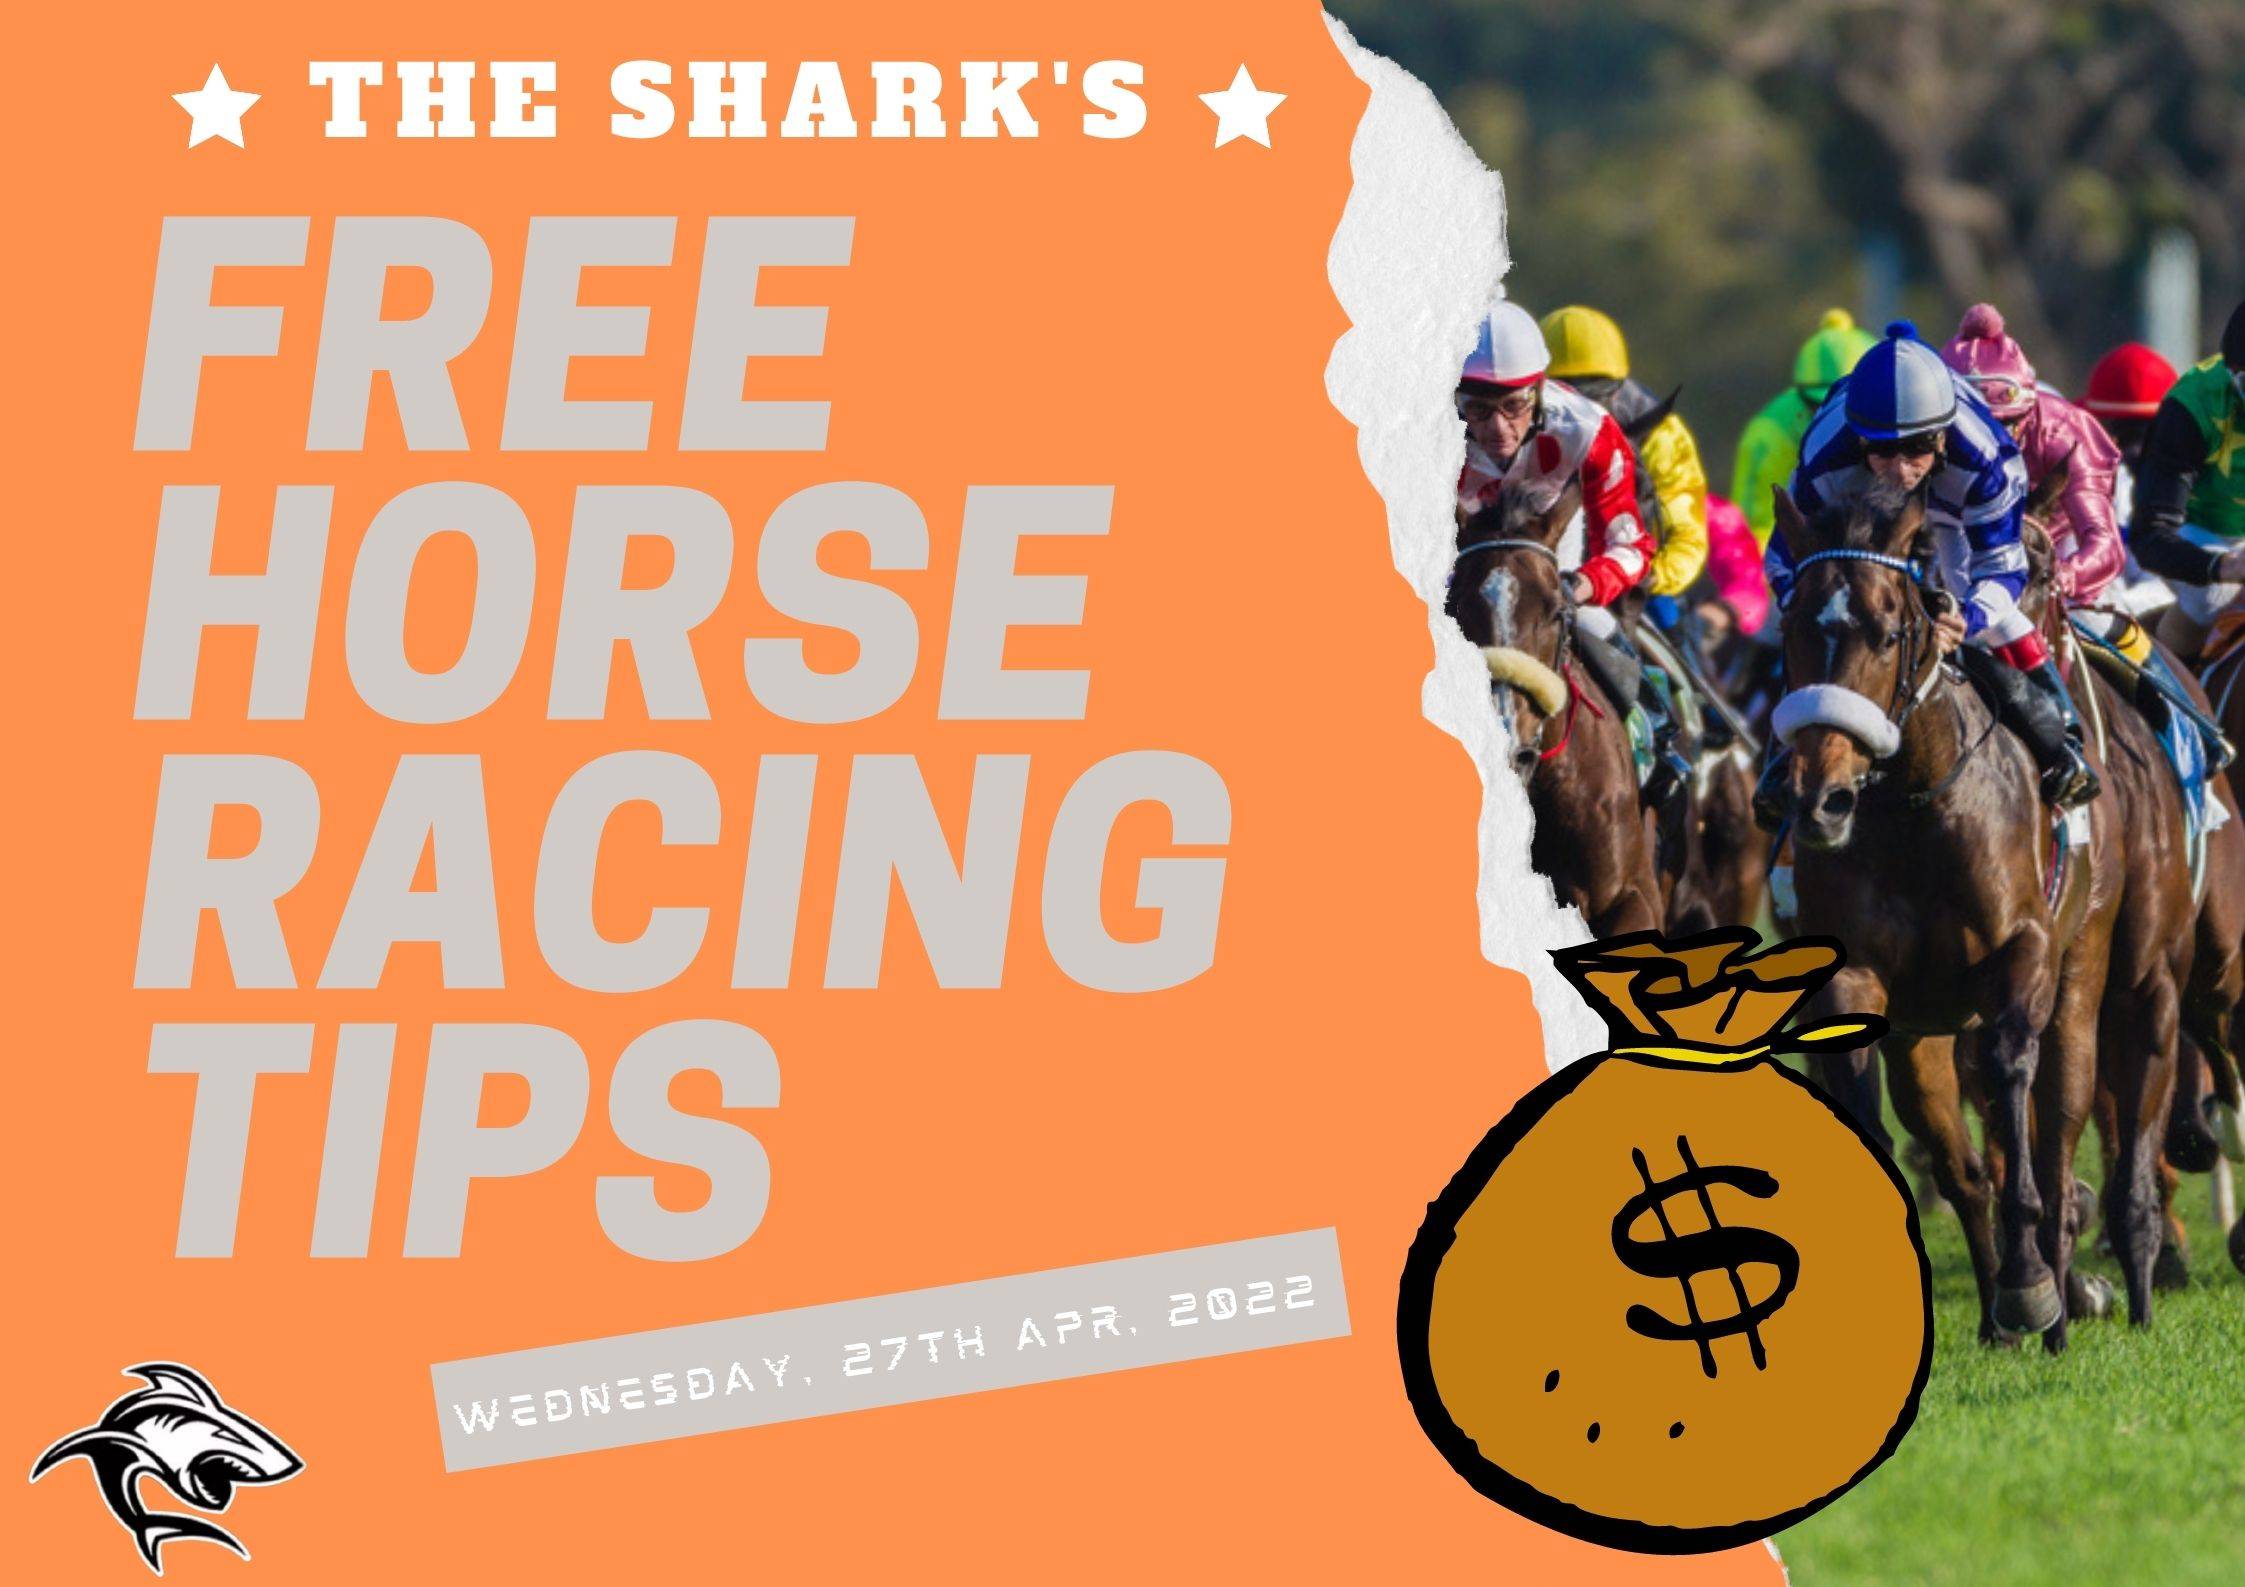 Free Horse Racing Tips - 27th Apr